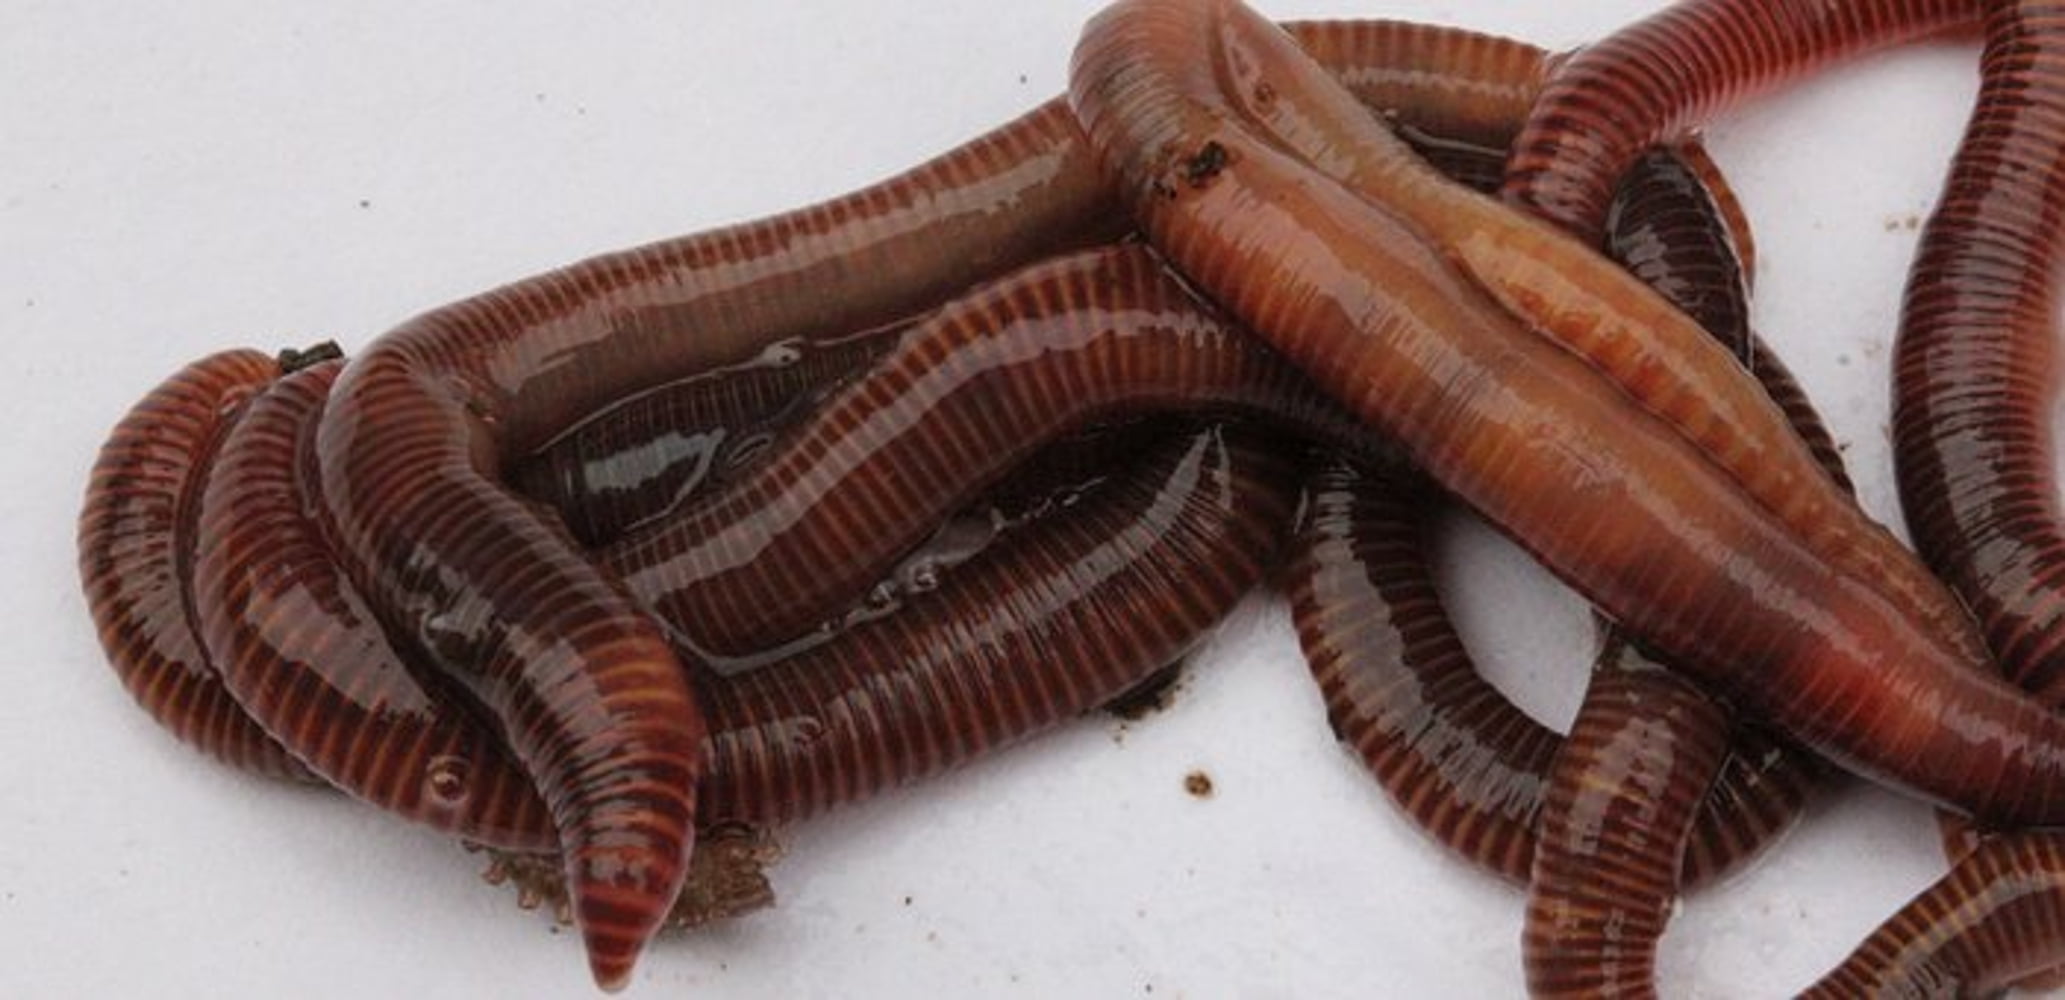 Live Pet Food for Lizards ; Red Wiggler Worms;1 pound approximately 1,000 worms 